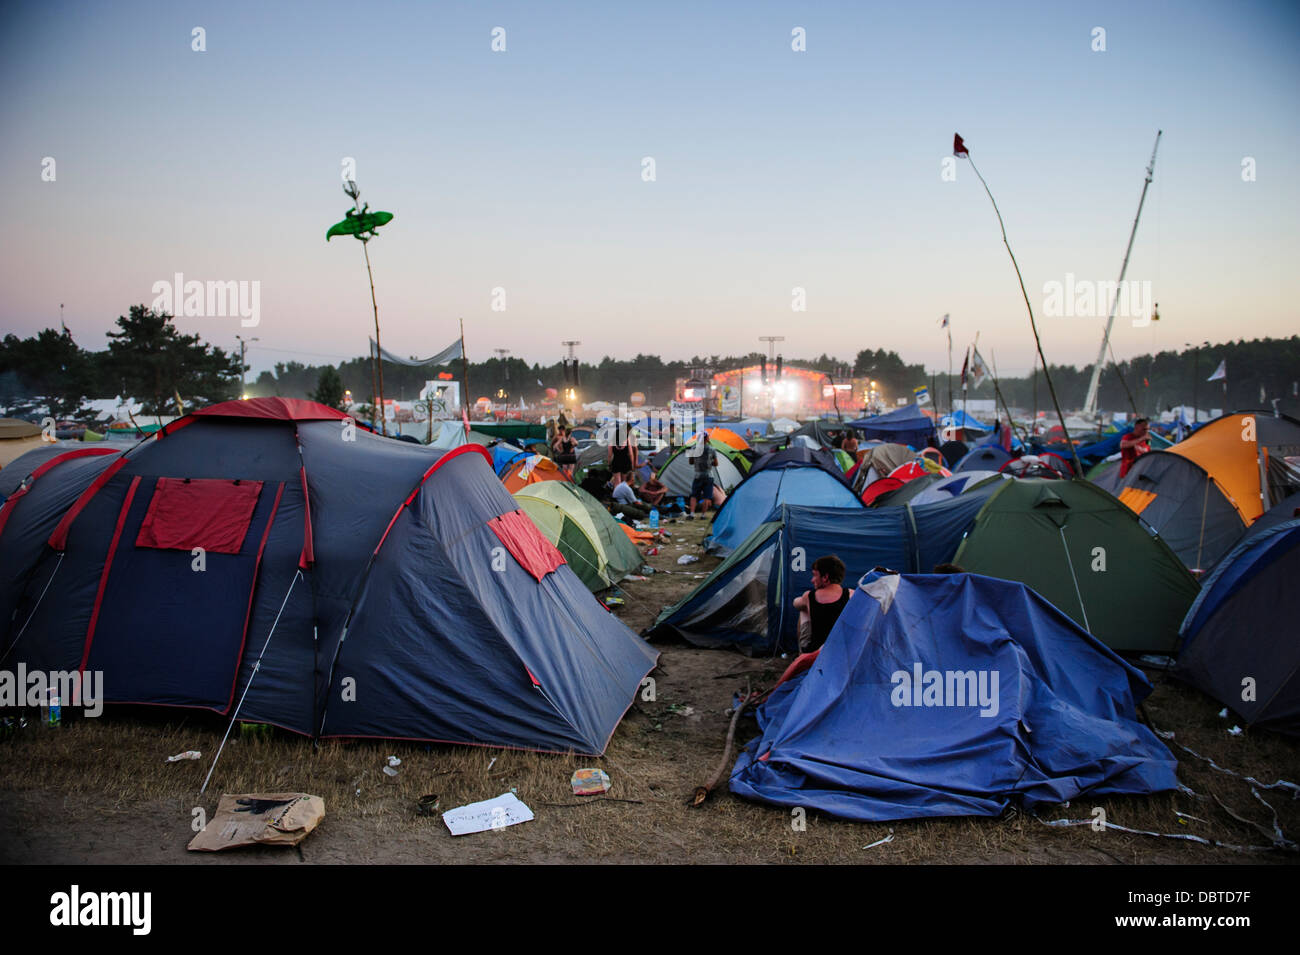 Tents at the main campsite during the Przystanek Woodstock Music festival in Kostrzyn, Poland. Stock Photo